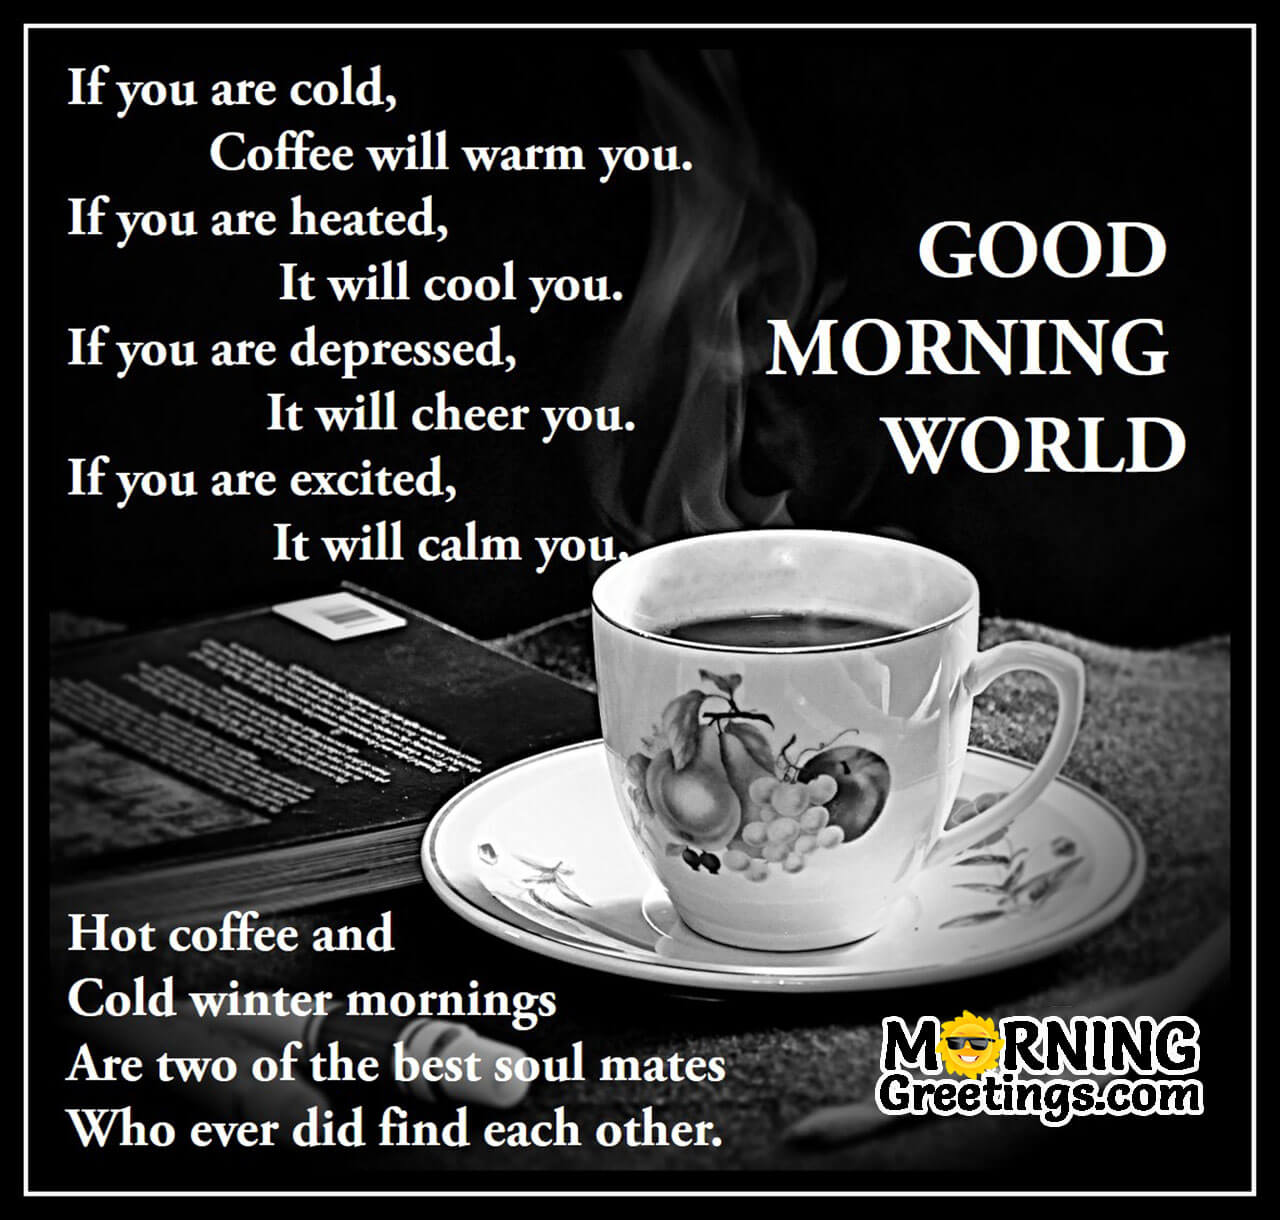 10 Brilliant Morning Coffee Quotes Morning Greetings